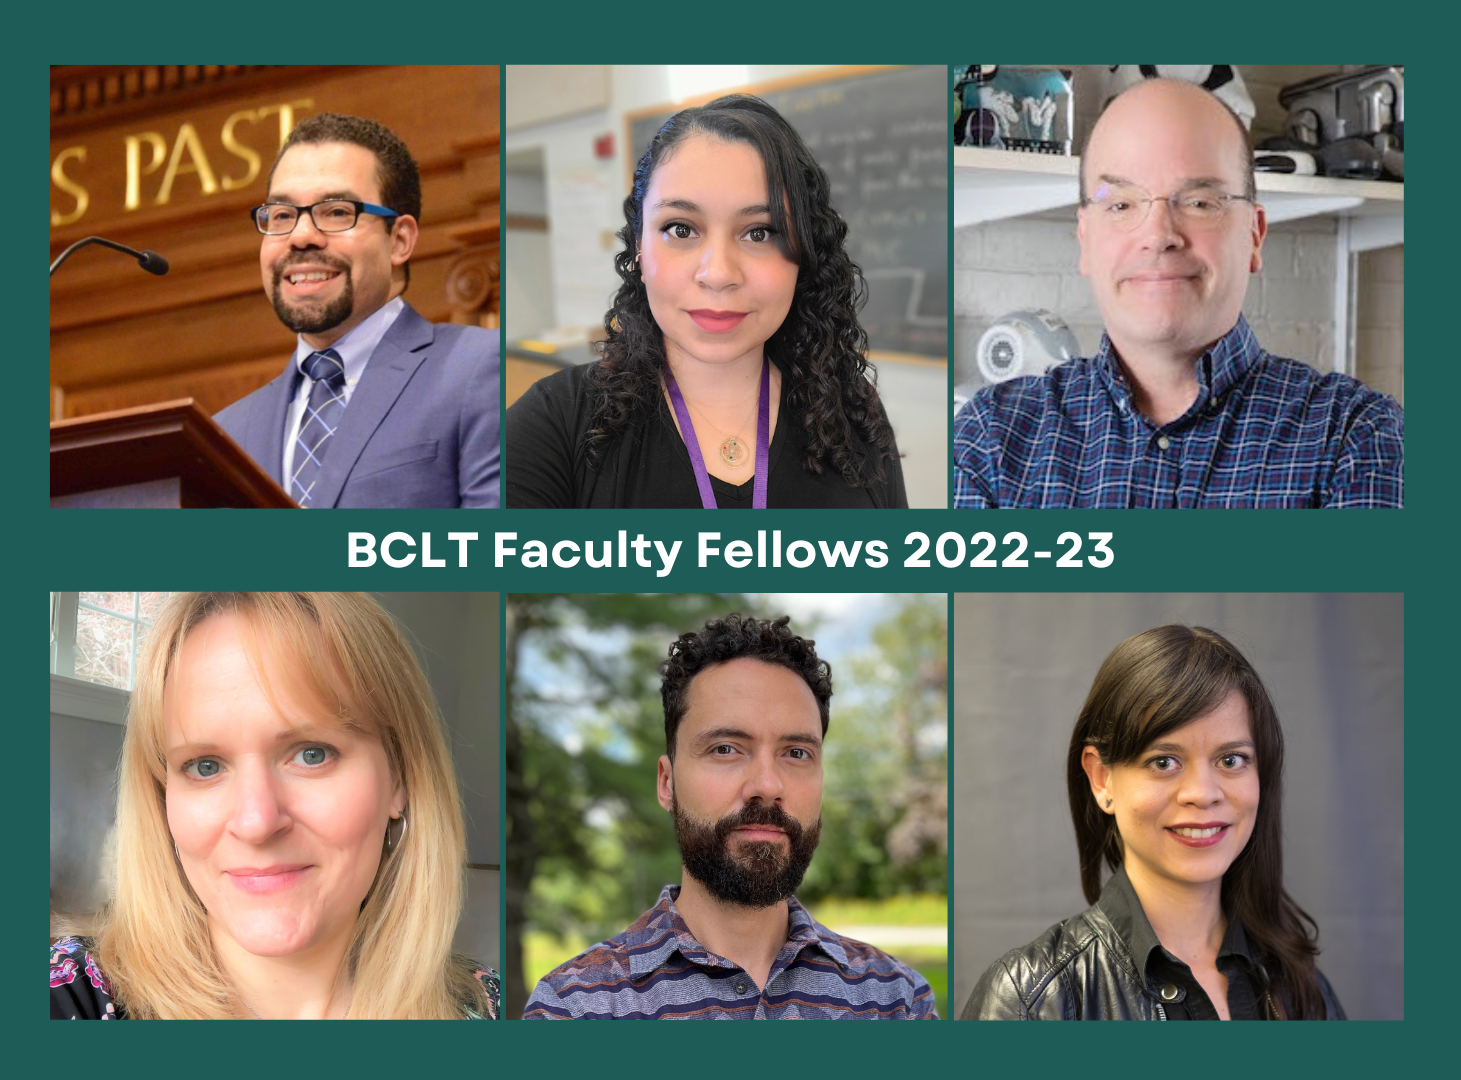 Opens Faculty Fellows Profiles with bios